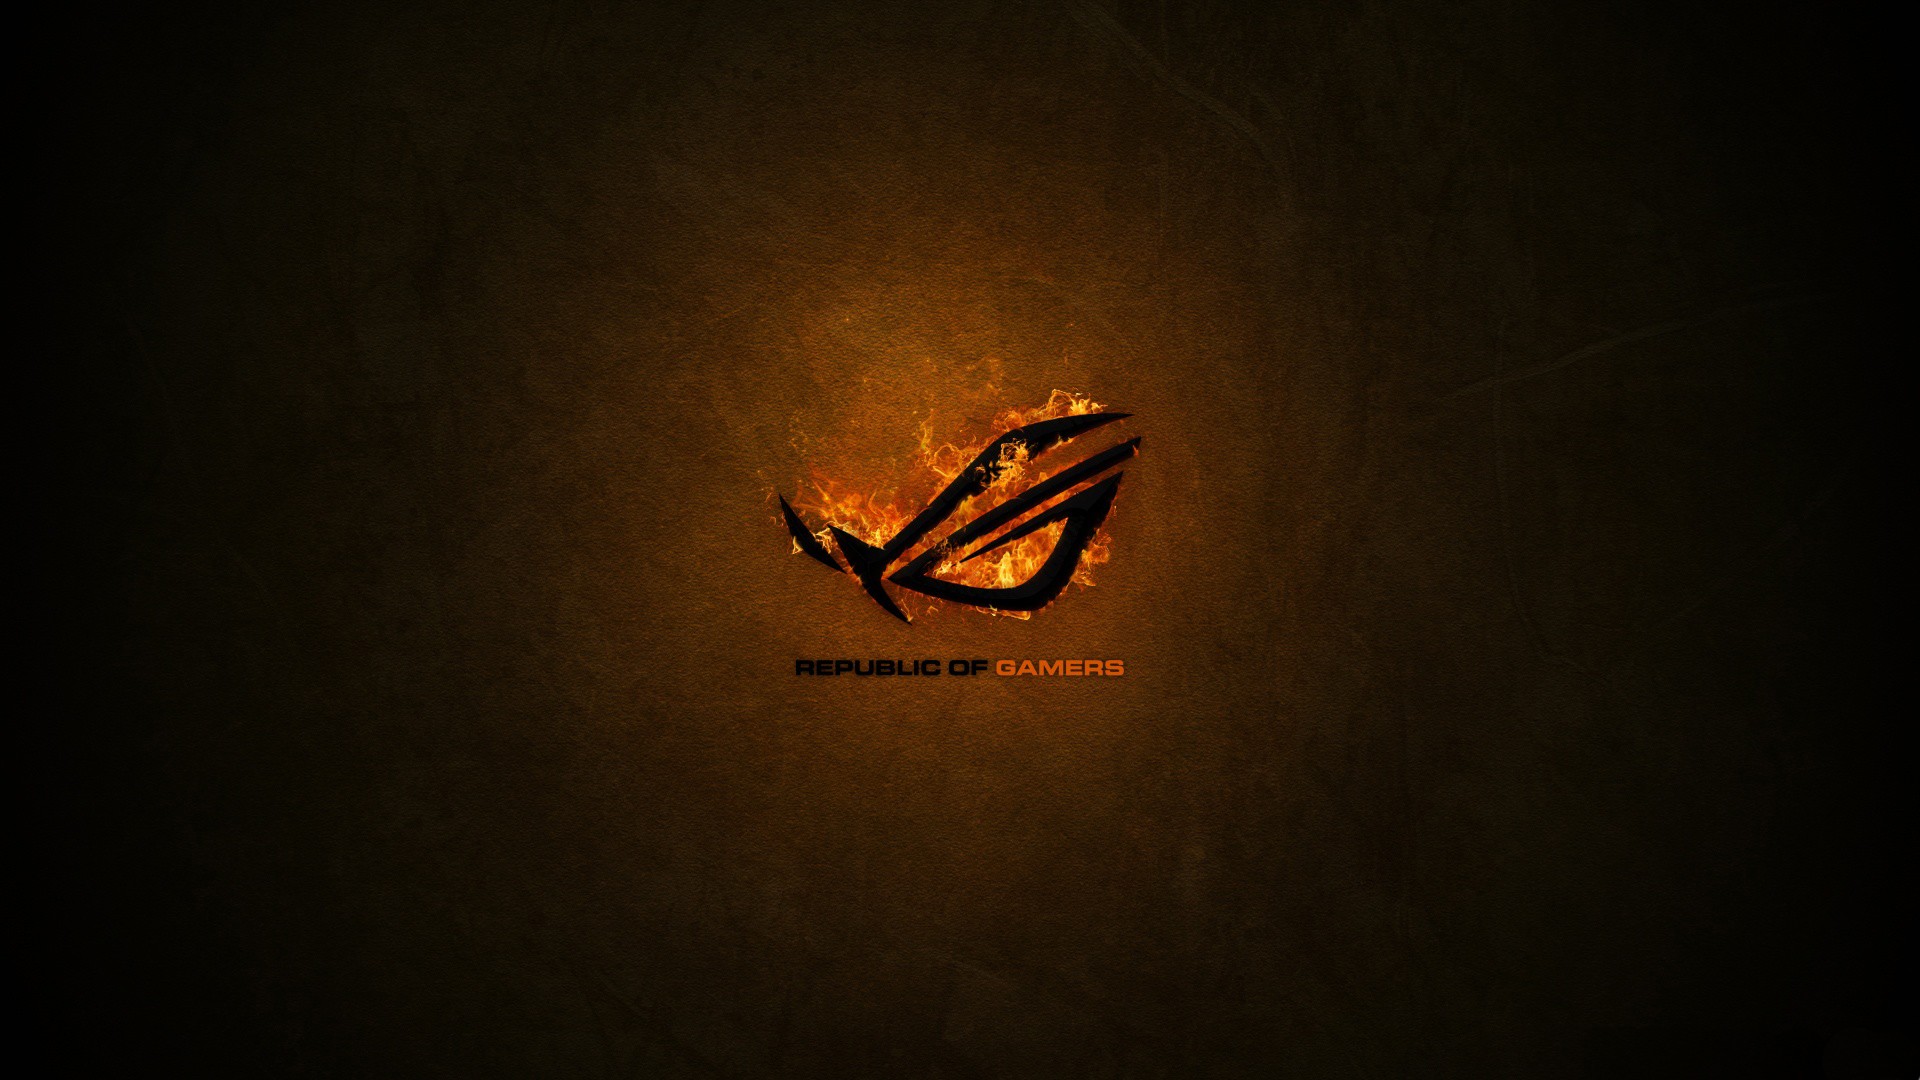 General 1920x1080 Republic of Gamers logo texture PC gaming